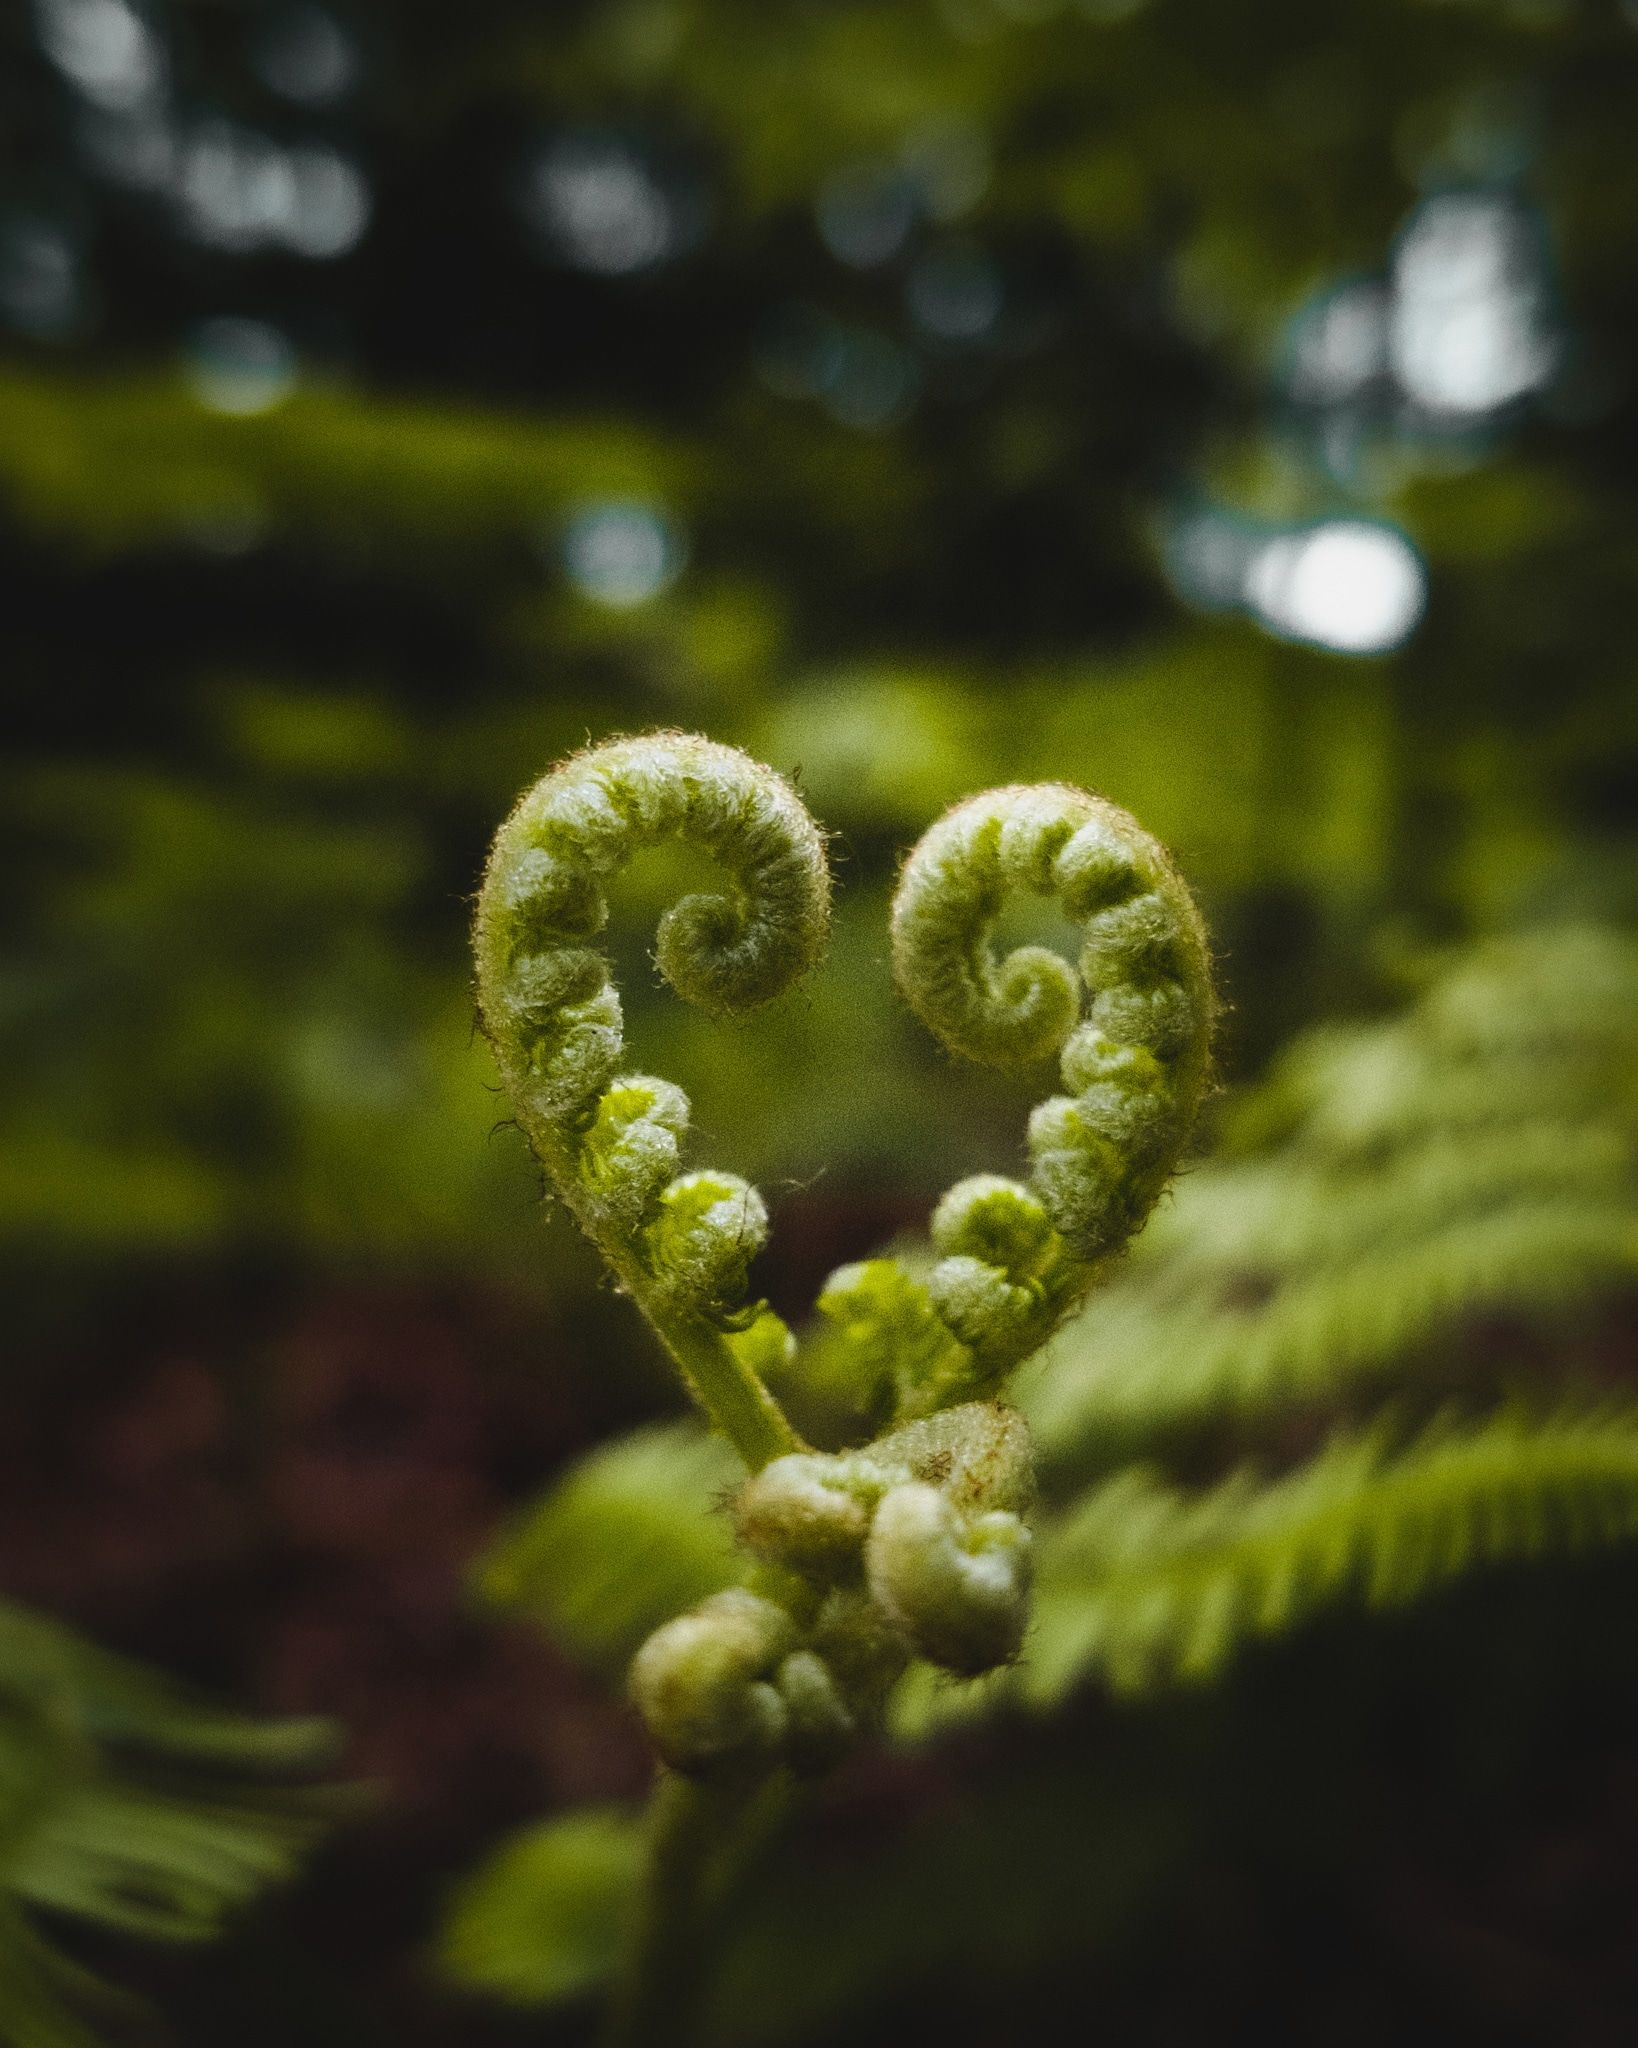 green color, growth, plant, close-up, no people, tendril, beauty in nature, nature, fern, day, fragility, curled up, vulnerability, focus on foreground, selective focus, freshness, outdoors, spiral, beginnings, tranquility